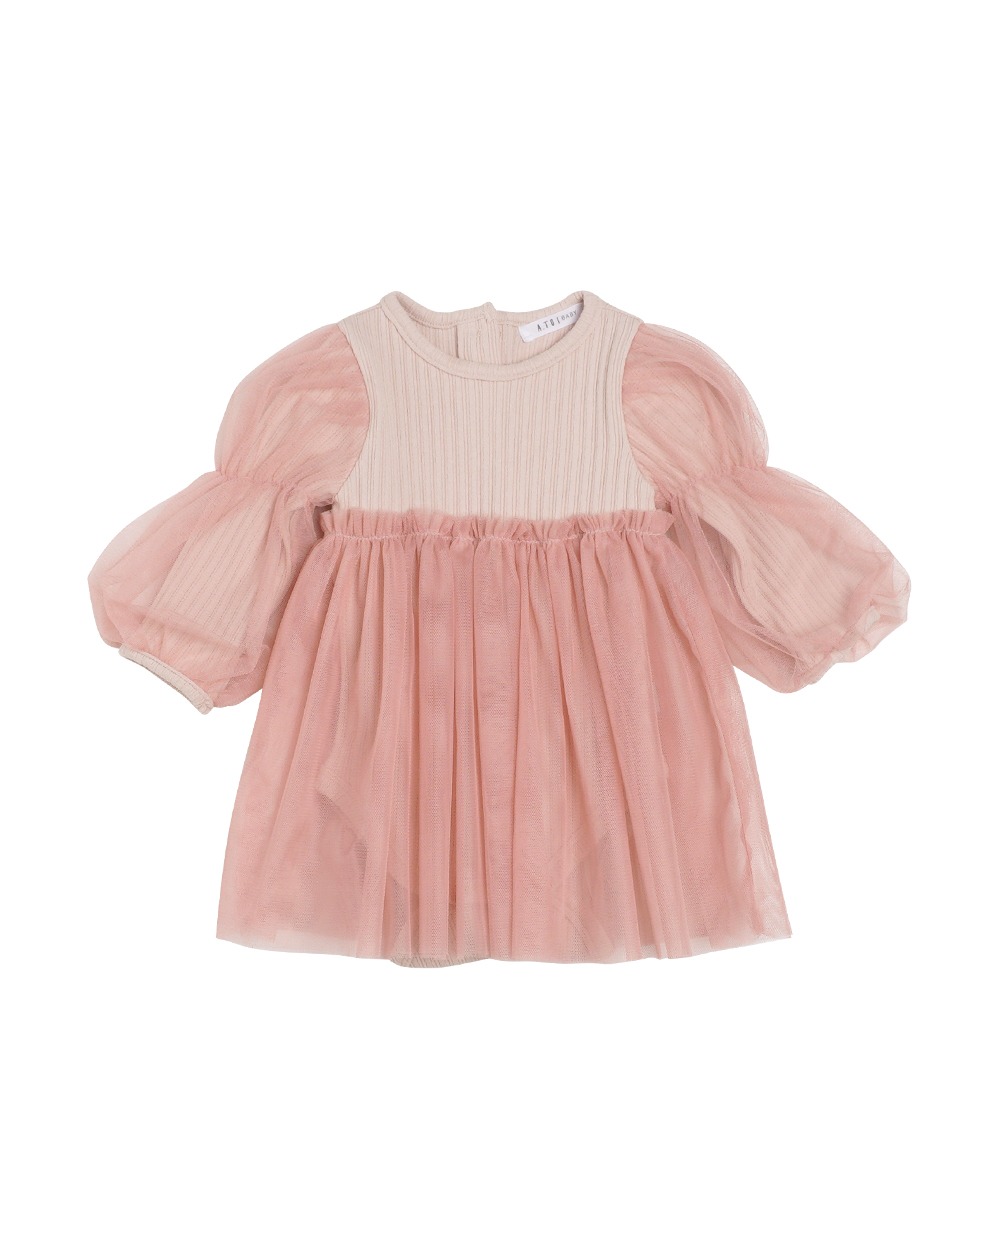 [a.toi baby] Eleanor Dressy Body Suit Pink - 마르마르